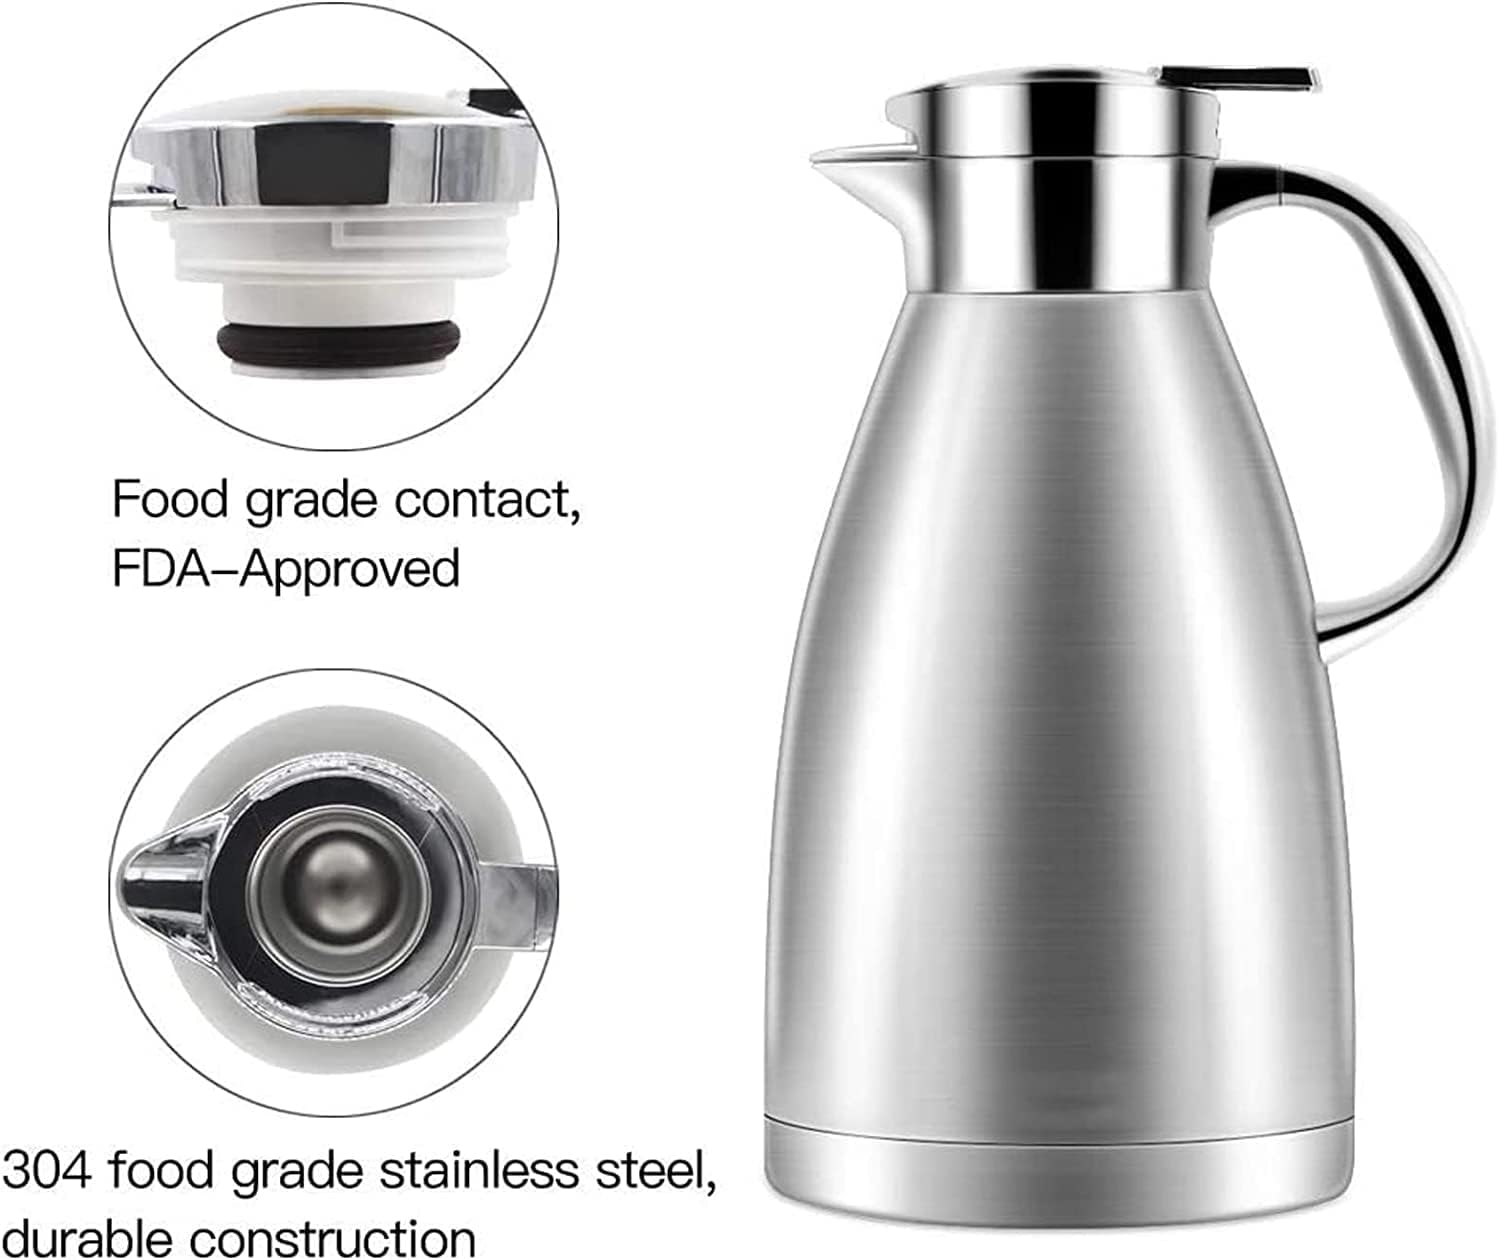 Thermal Coffee Carafe Stainless Steel - Heavy Duty, 24hr Lab Tested He –  SHANULKA Home Decor